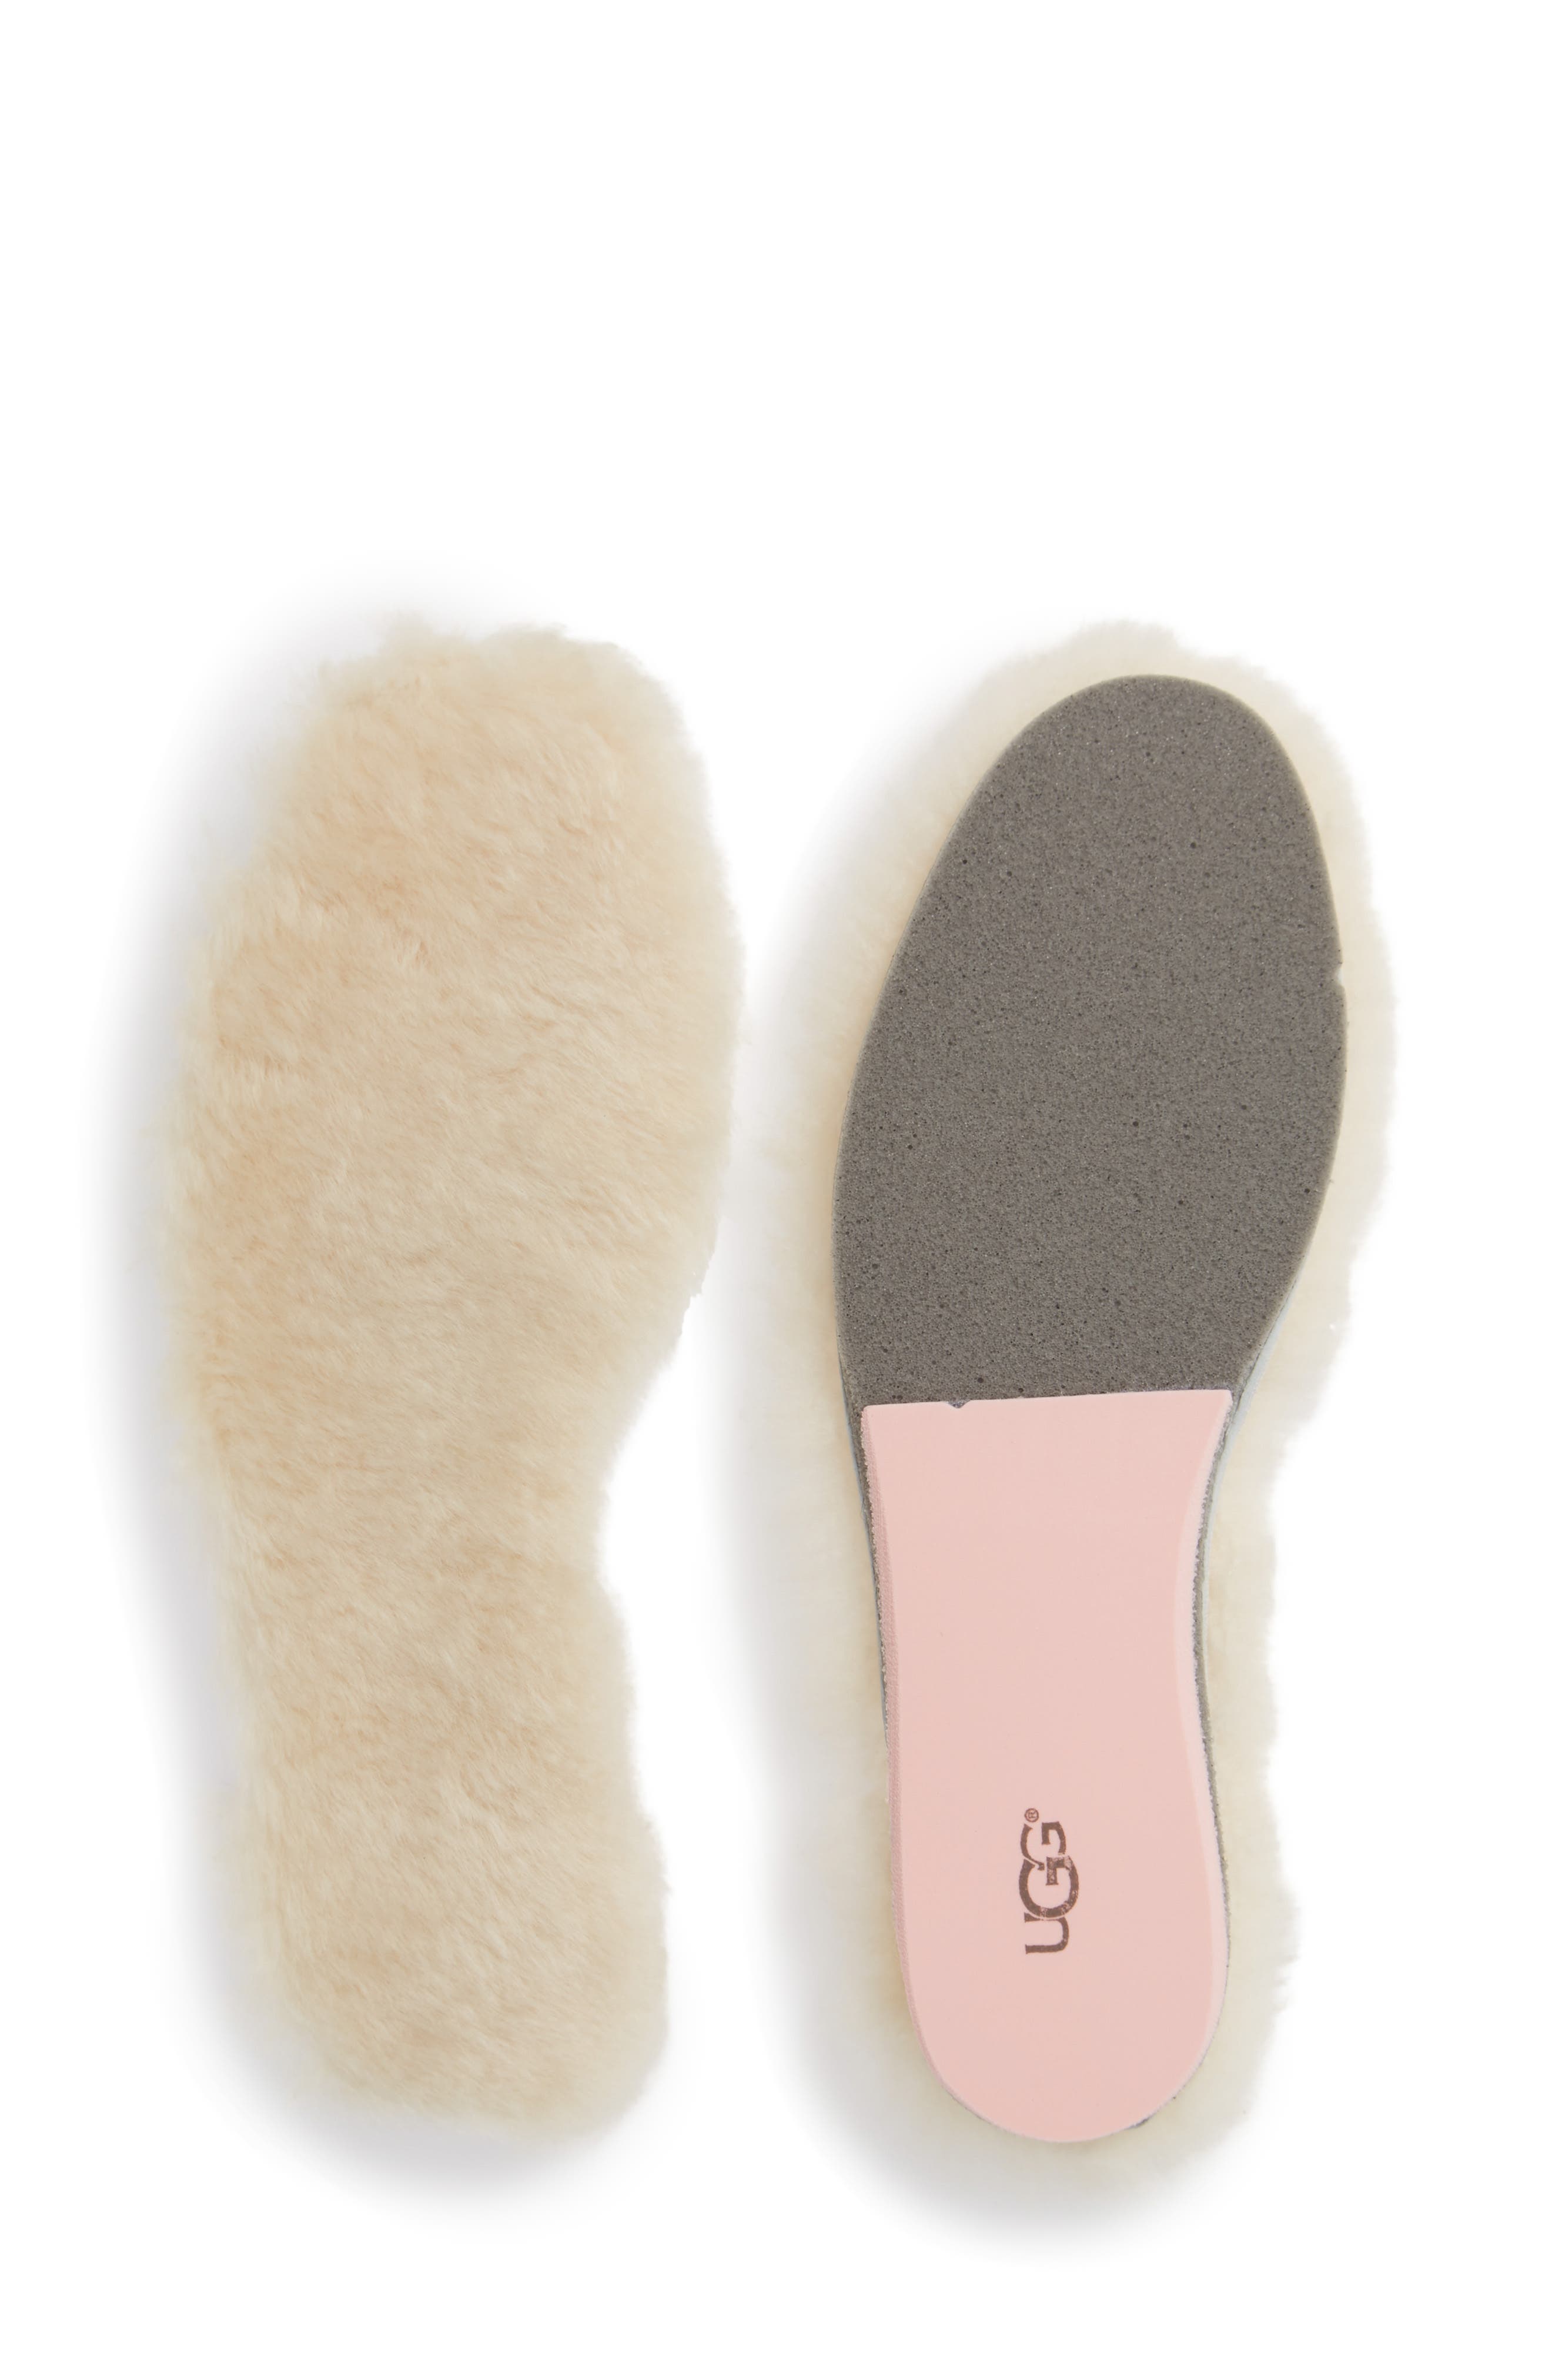 insoles for women's shoes